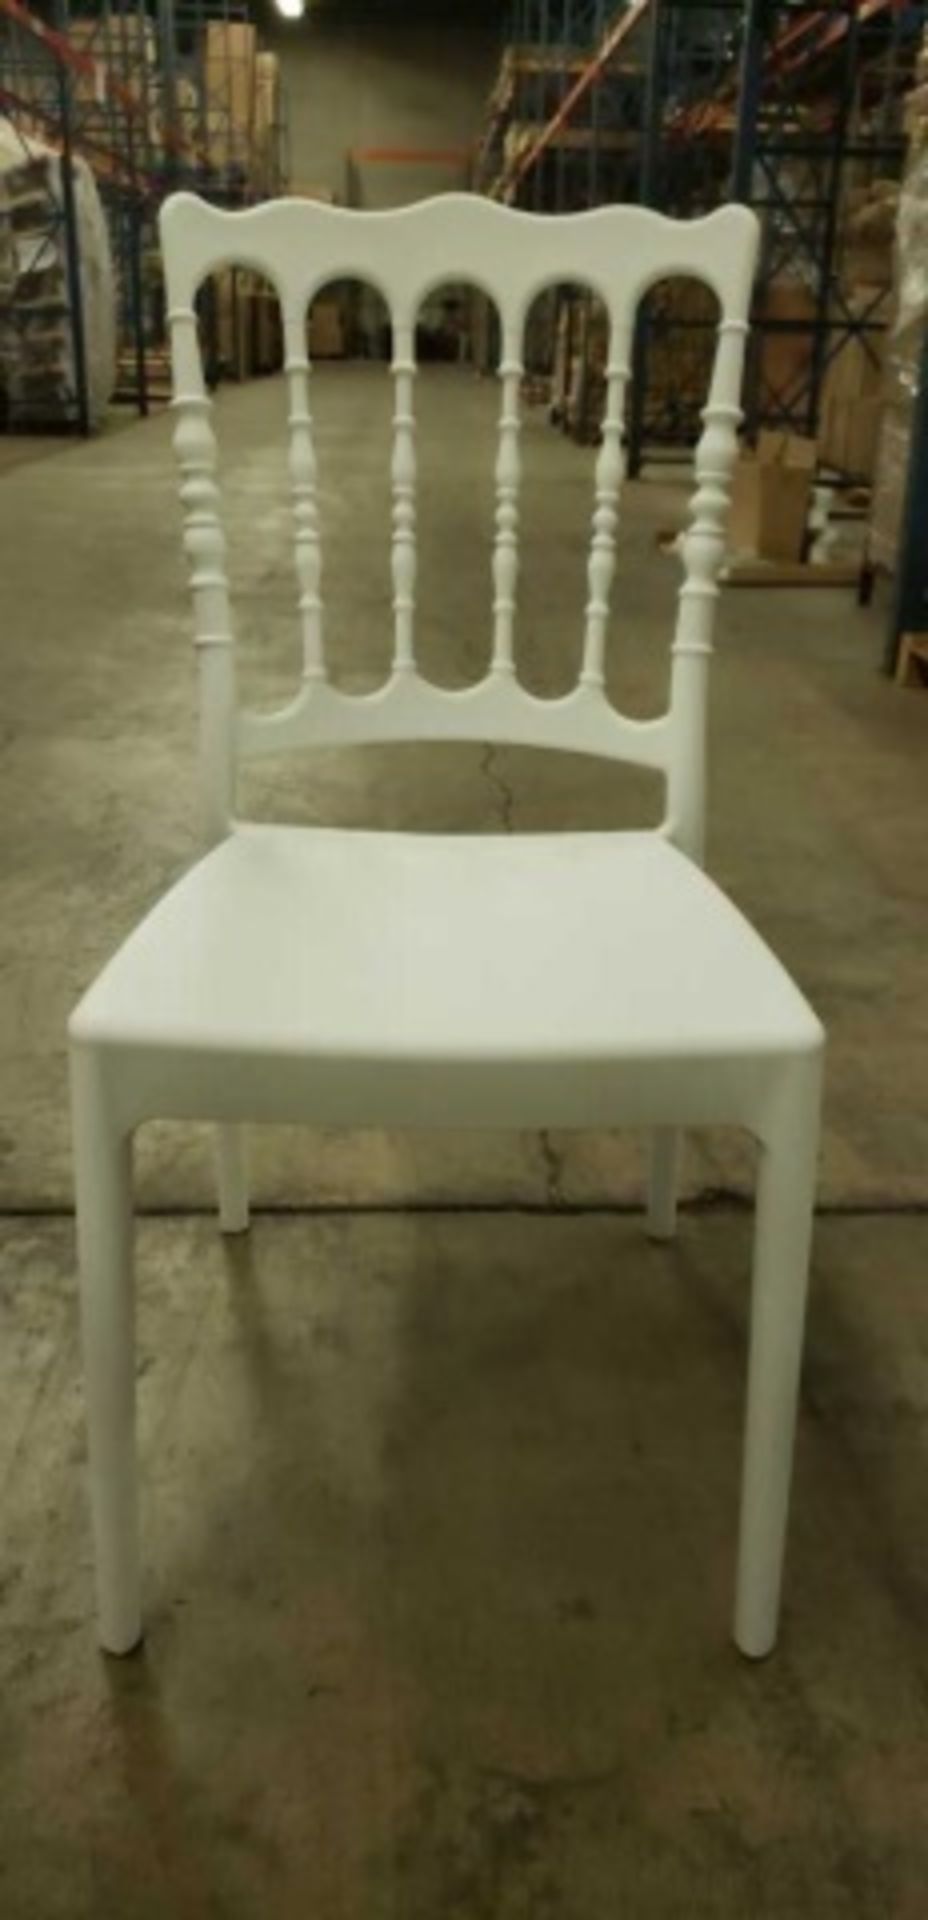 Napoleon Side Chair - White. One piece fiberglass reinforced polypropylene. Dimensions: 17.7"w x - Image 3 of 6